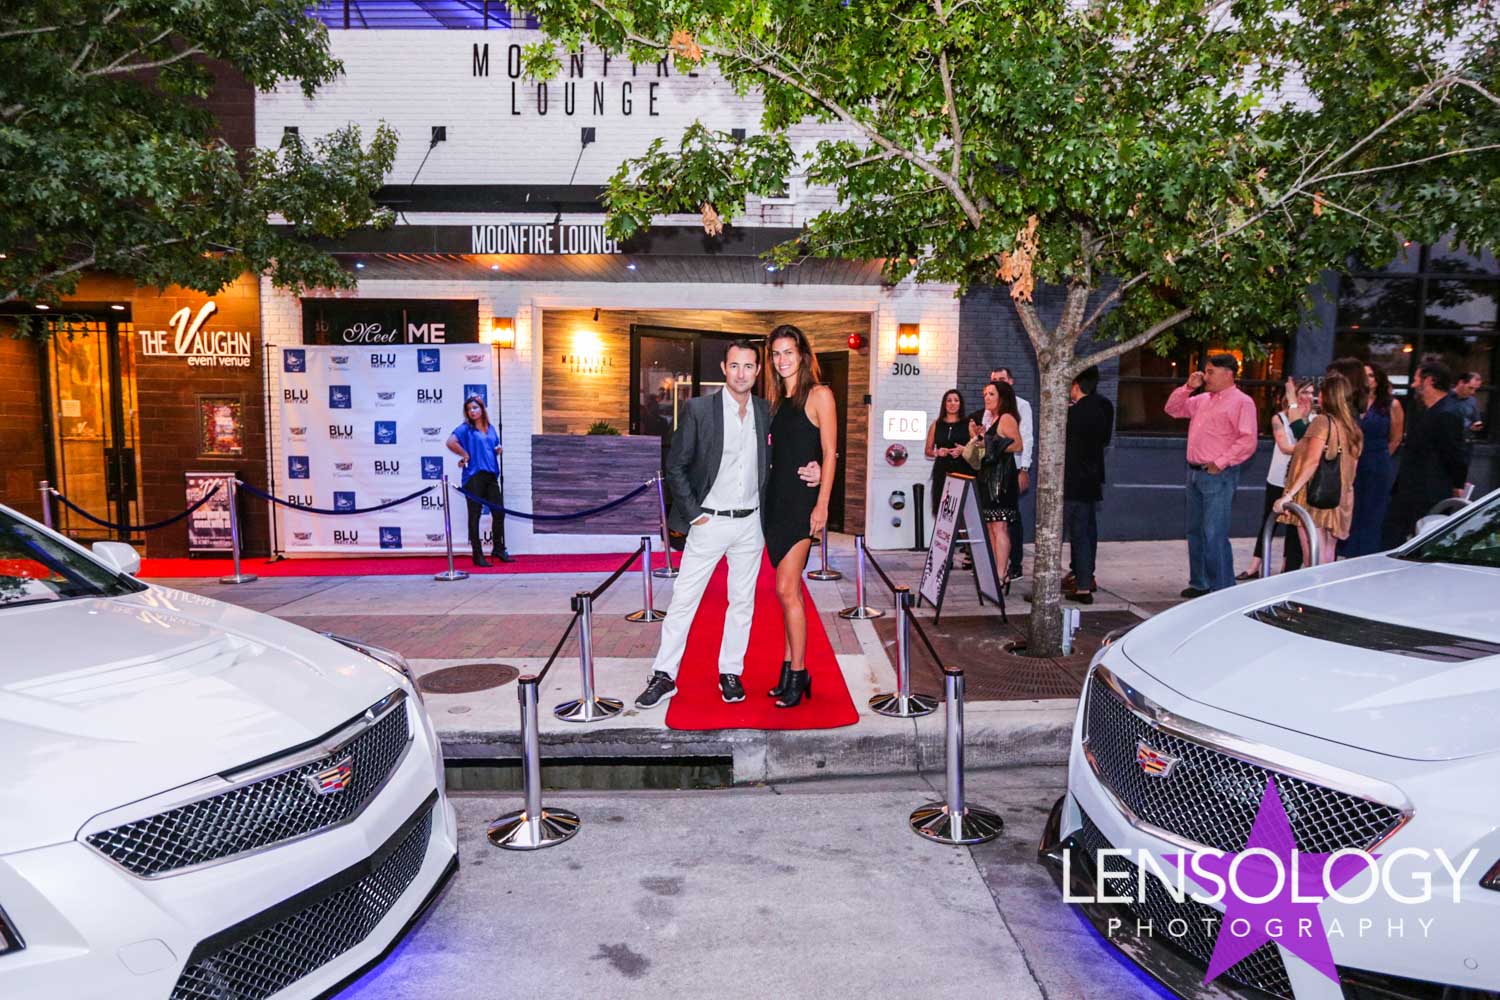 LENSOLOGY.NET - My Yacht Group promo event for Cadillac cars, Austin, TX.
All images are copyright of Lensology.net
Email: info@lensology.net
www.lensology.net